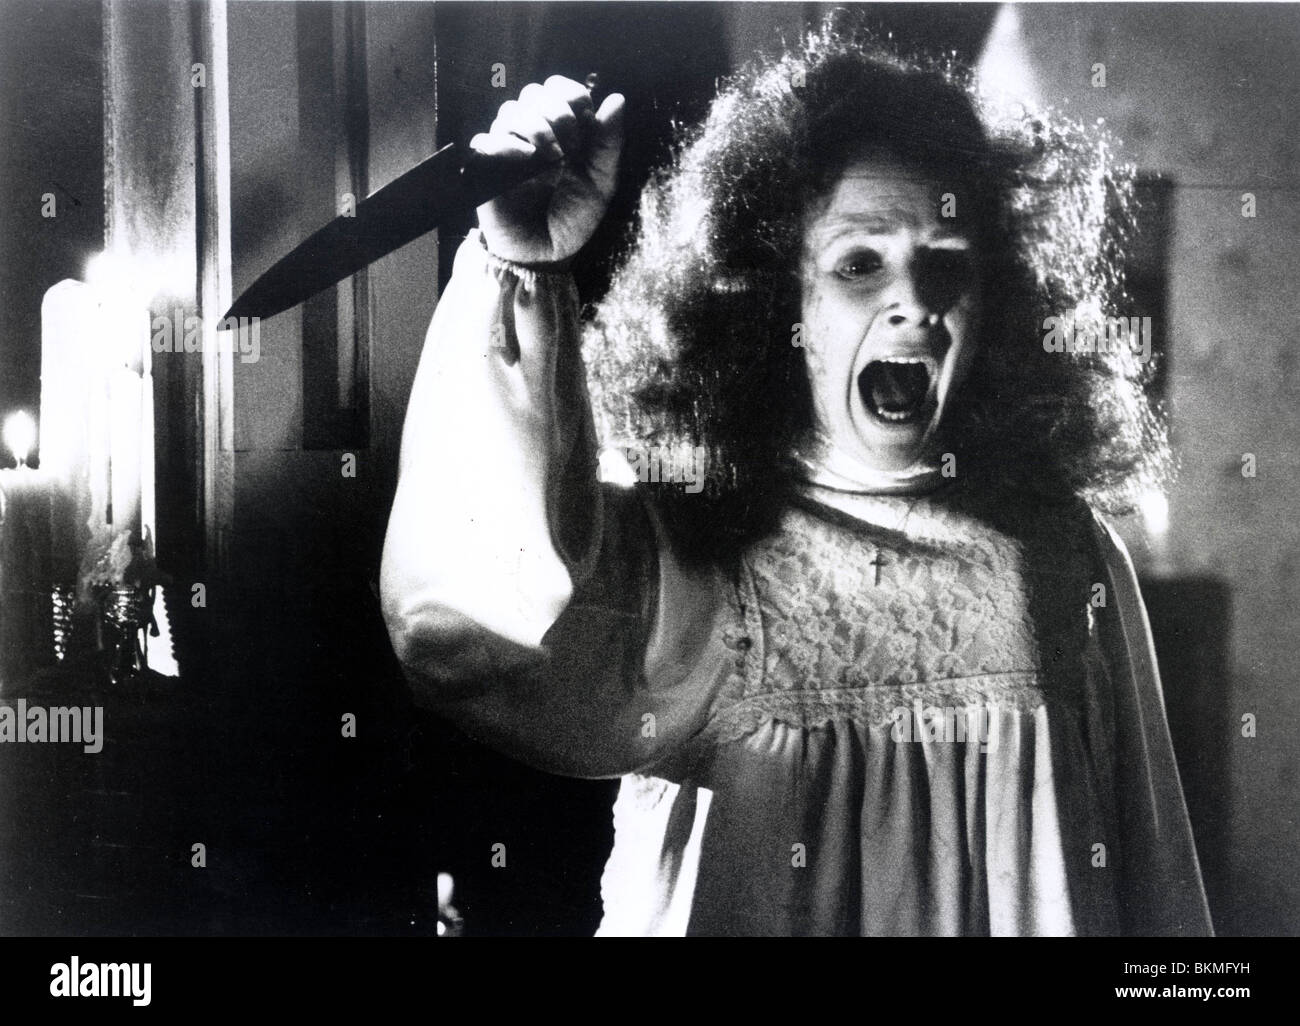 CARRIE -1976 PIPER LAURIE Banque D'Images